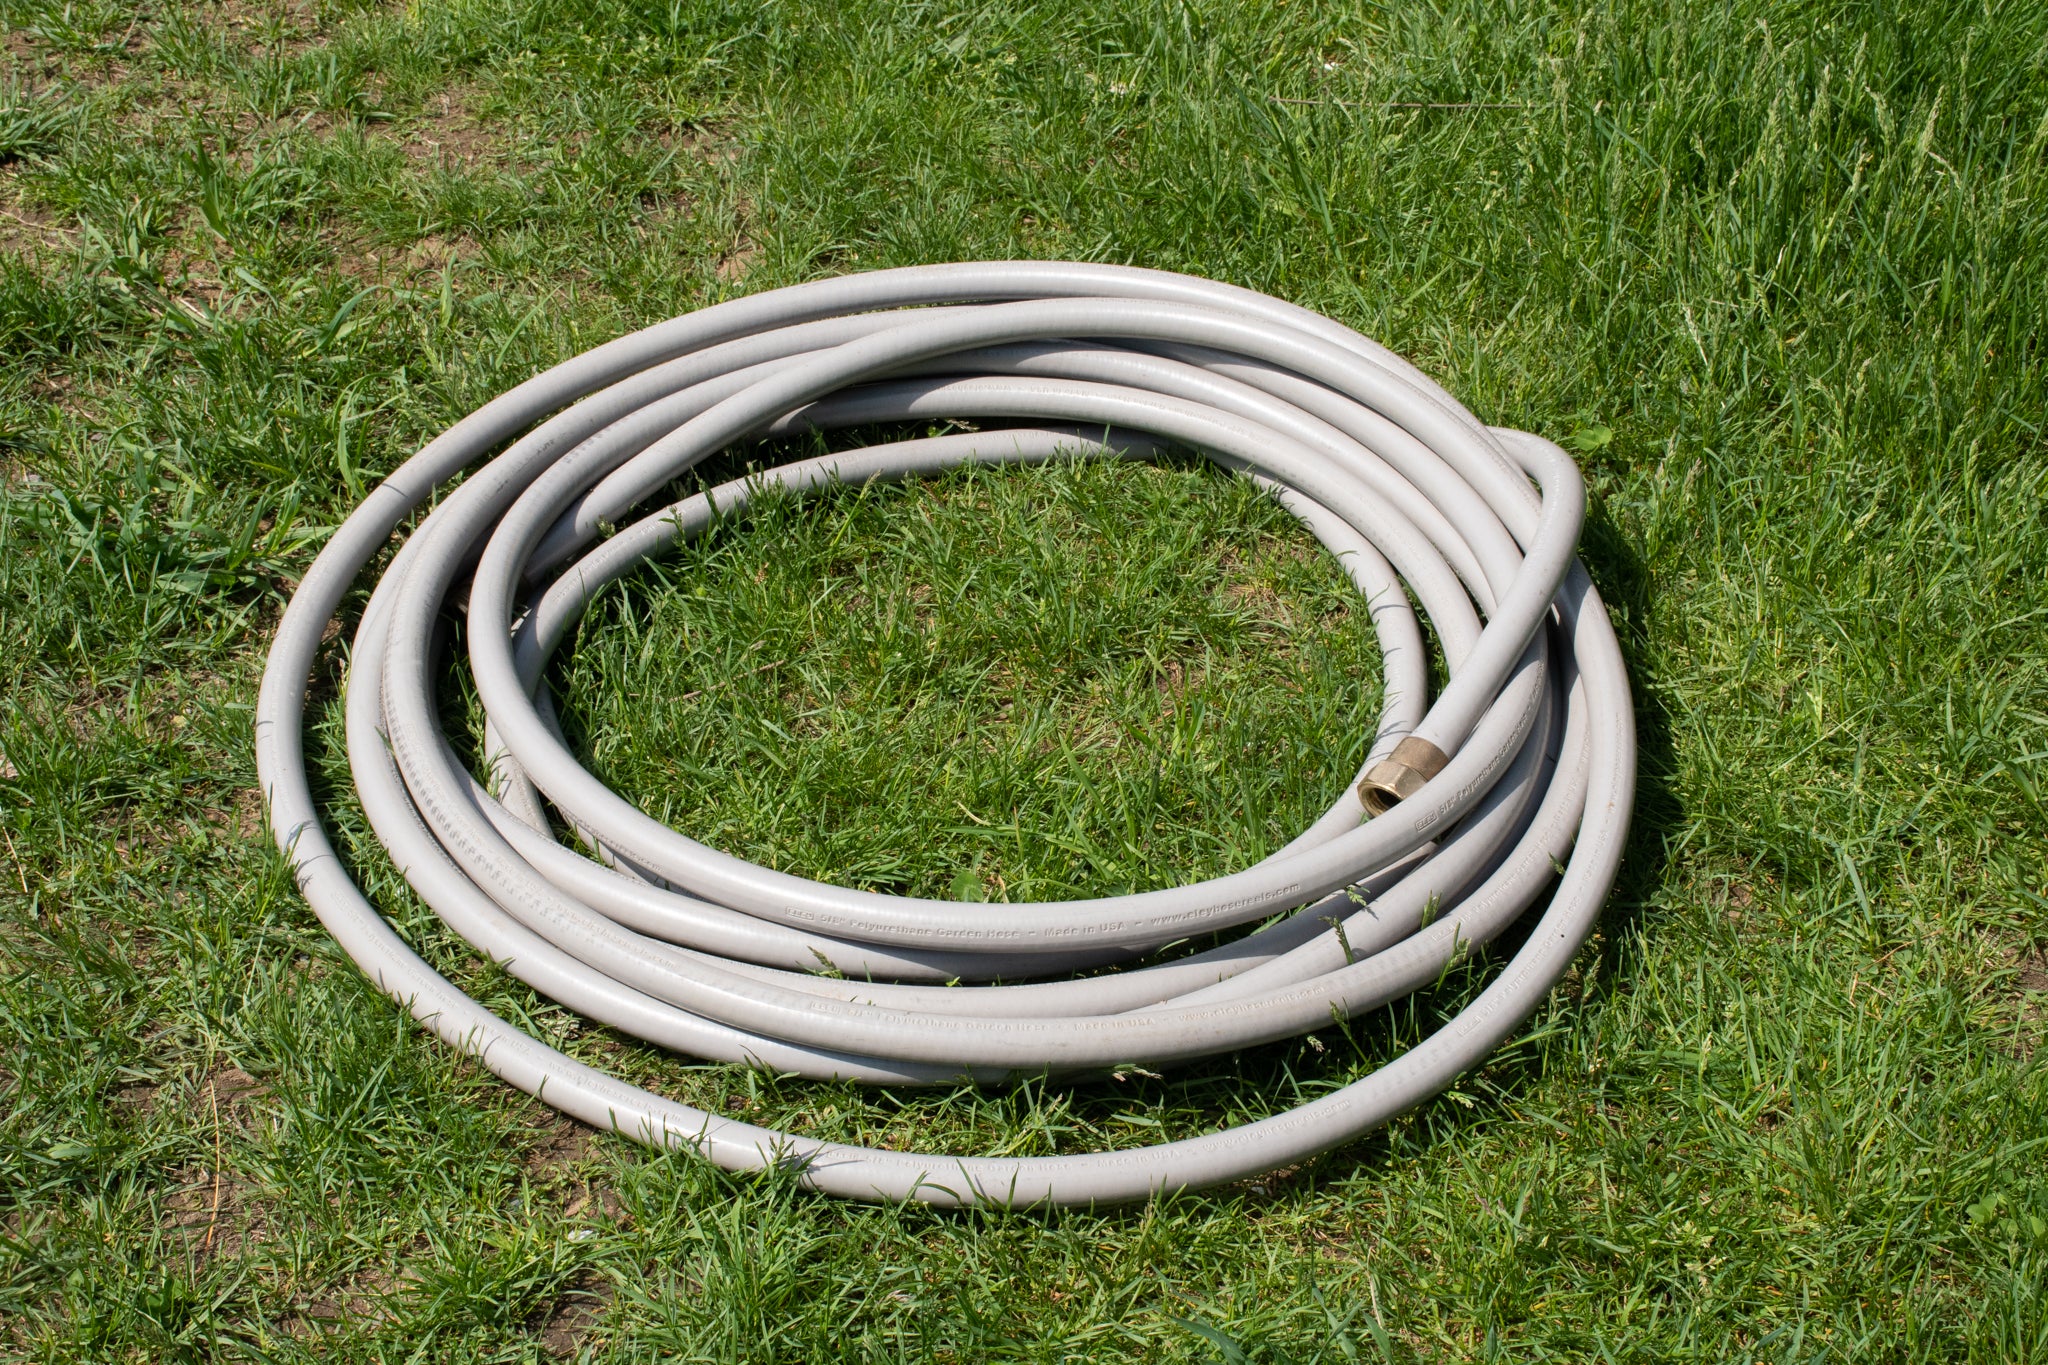 Stretchy Hoses The Best Solution for Your Gardening Needs